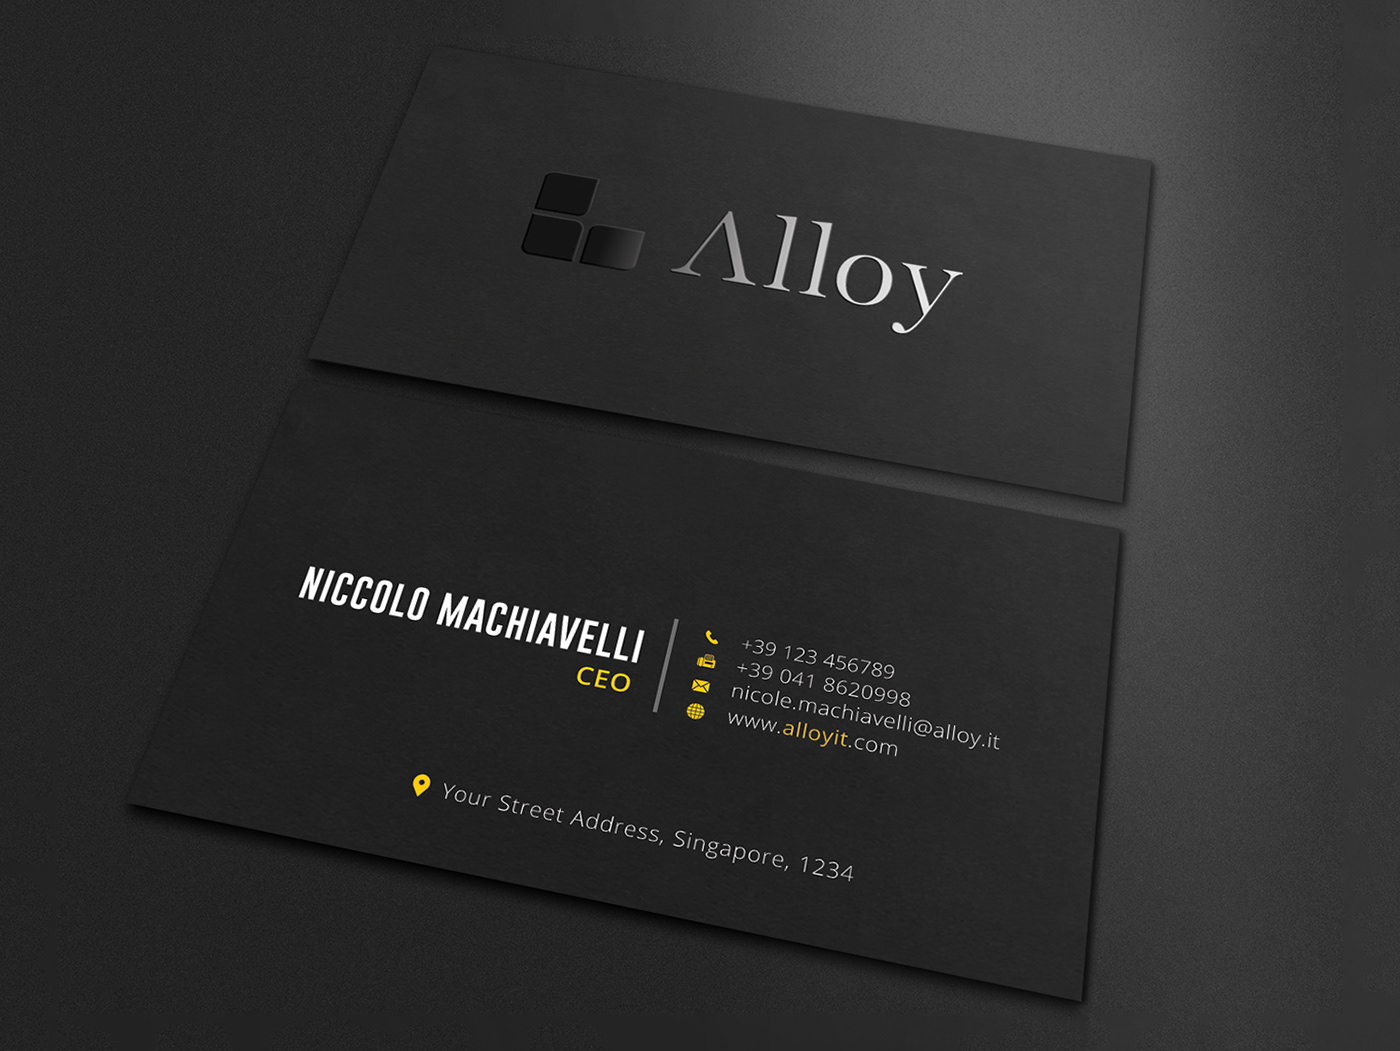 Download Business Card Mockup PSD file | Free Download Vol.1 - Graphic School